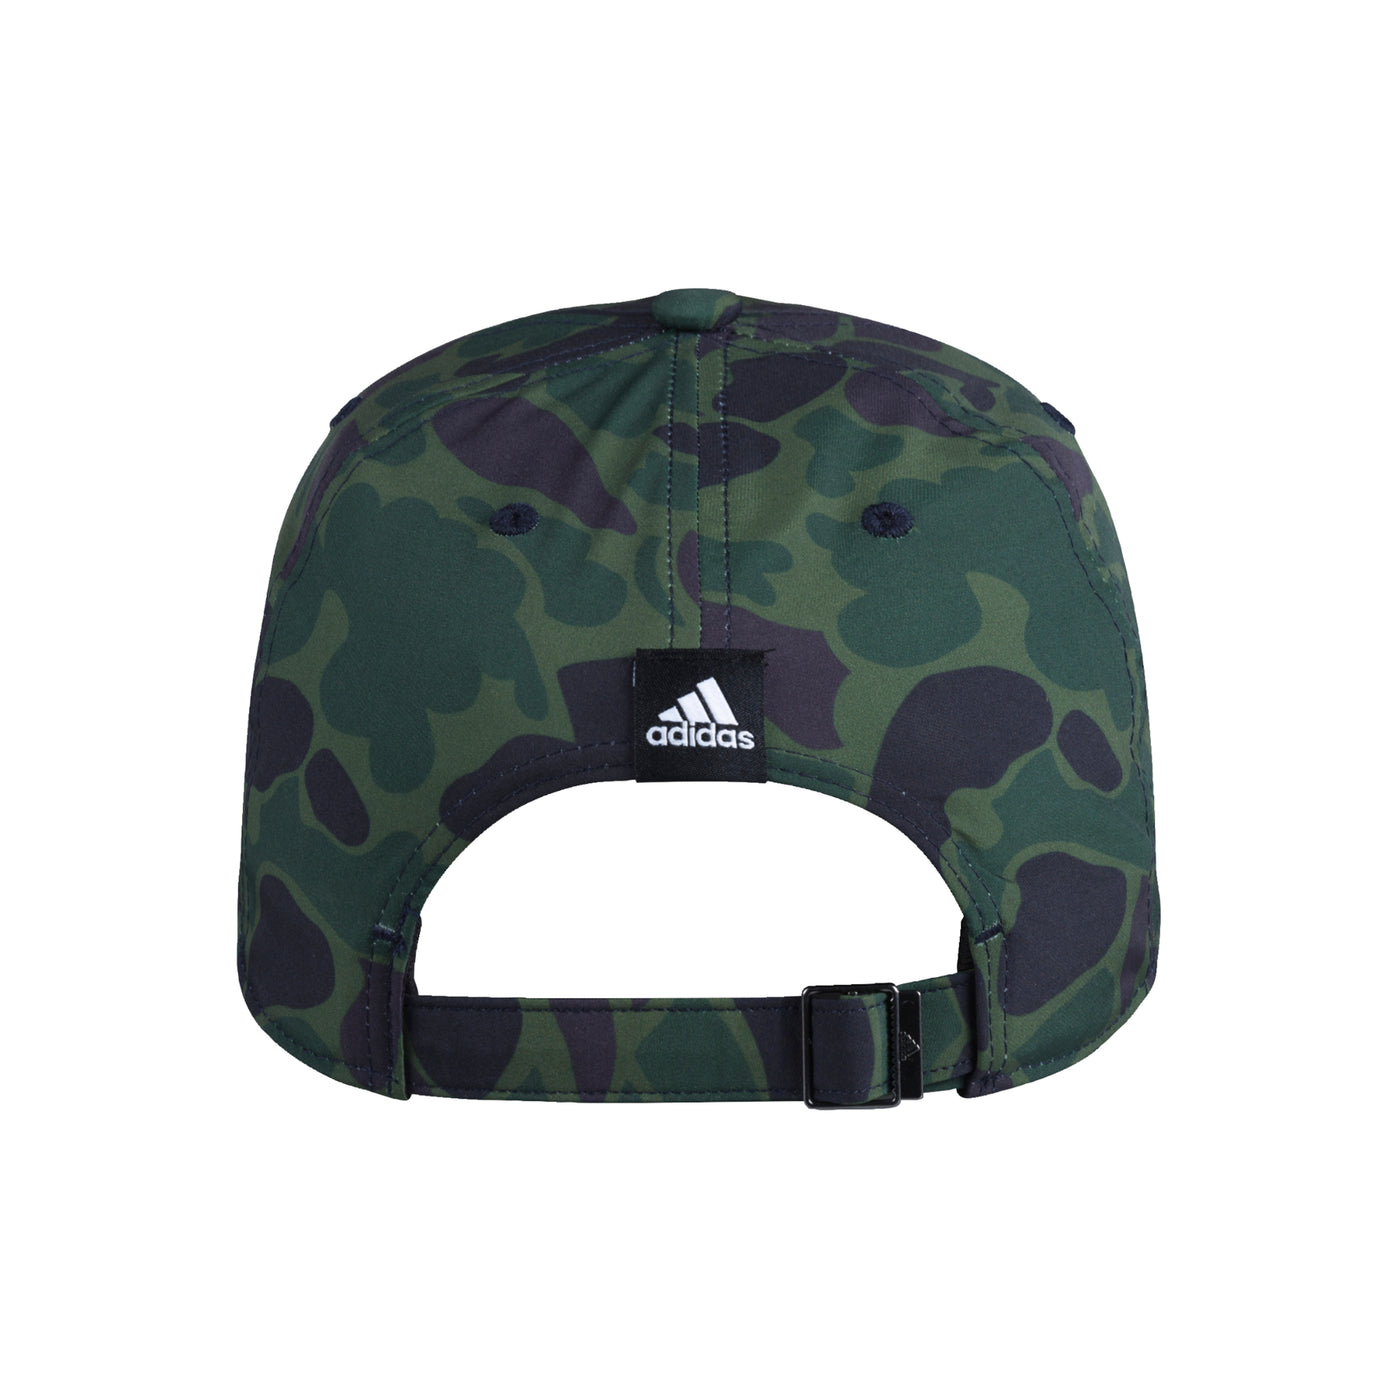 Back of green camo Adidas hat with adjustble strap